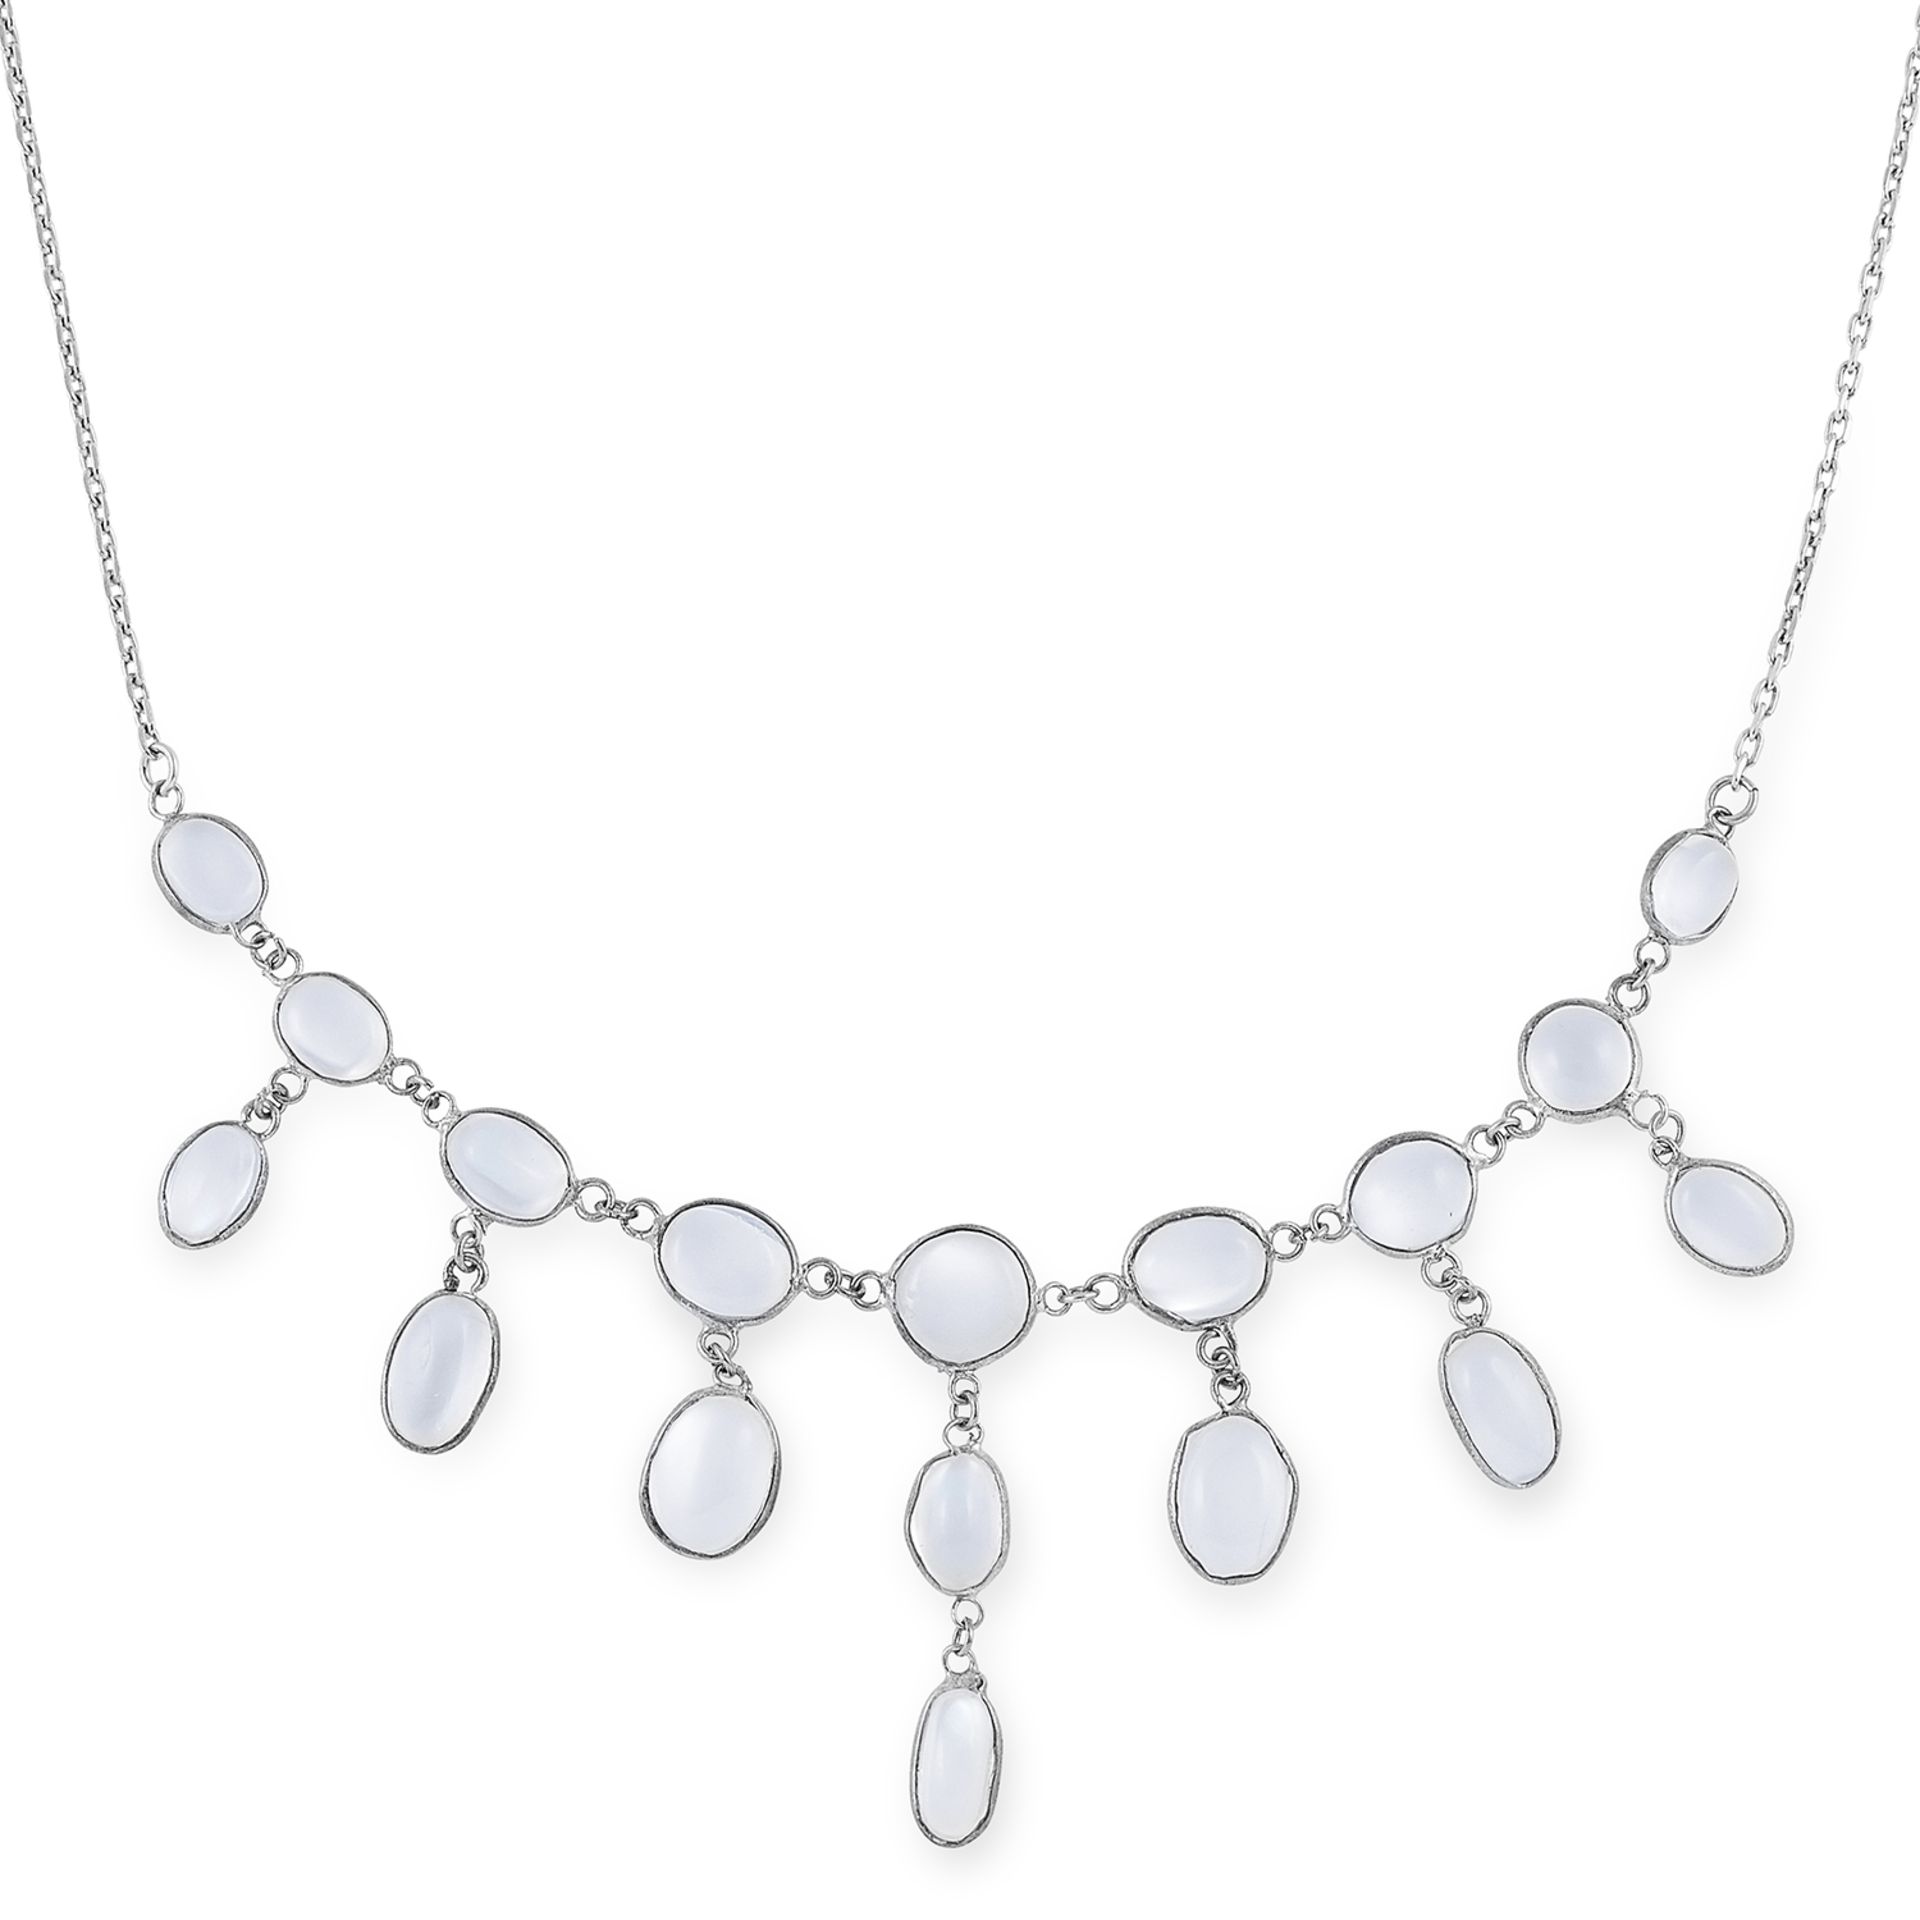 MOONSTONE NECKLACE set with cabochon moonstones, 48cm, 7.5g.